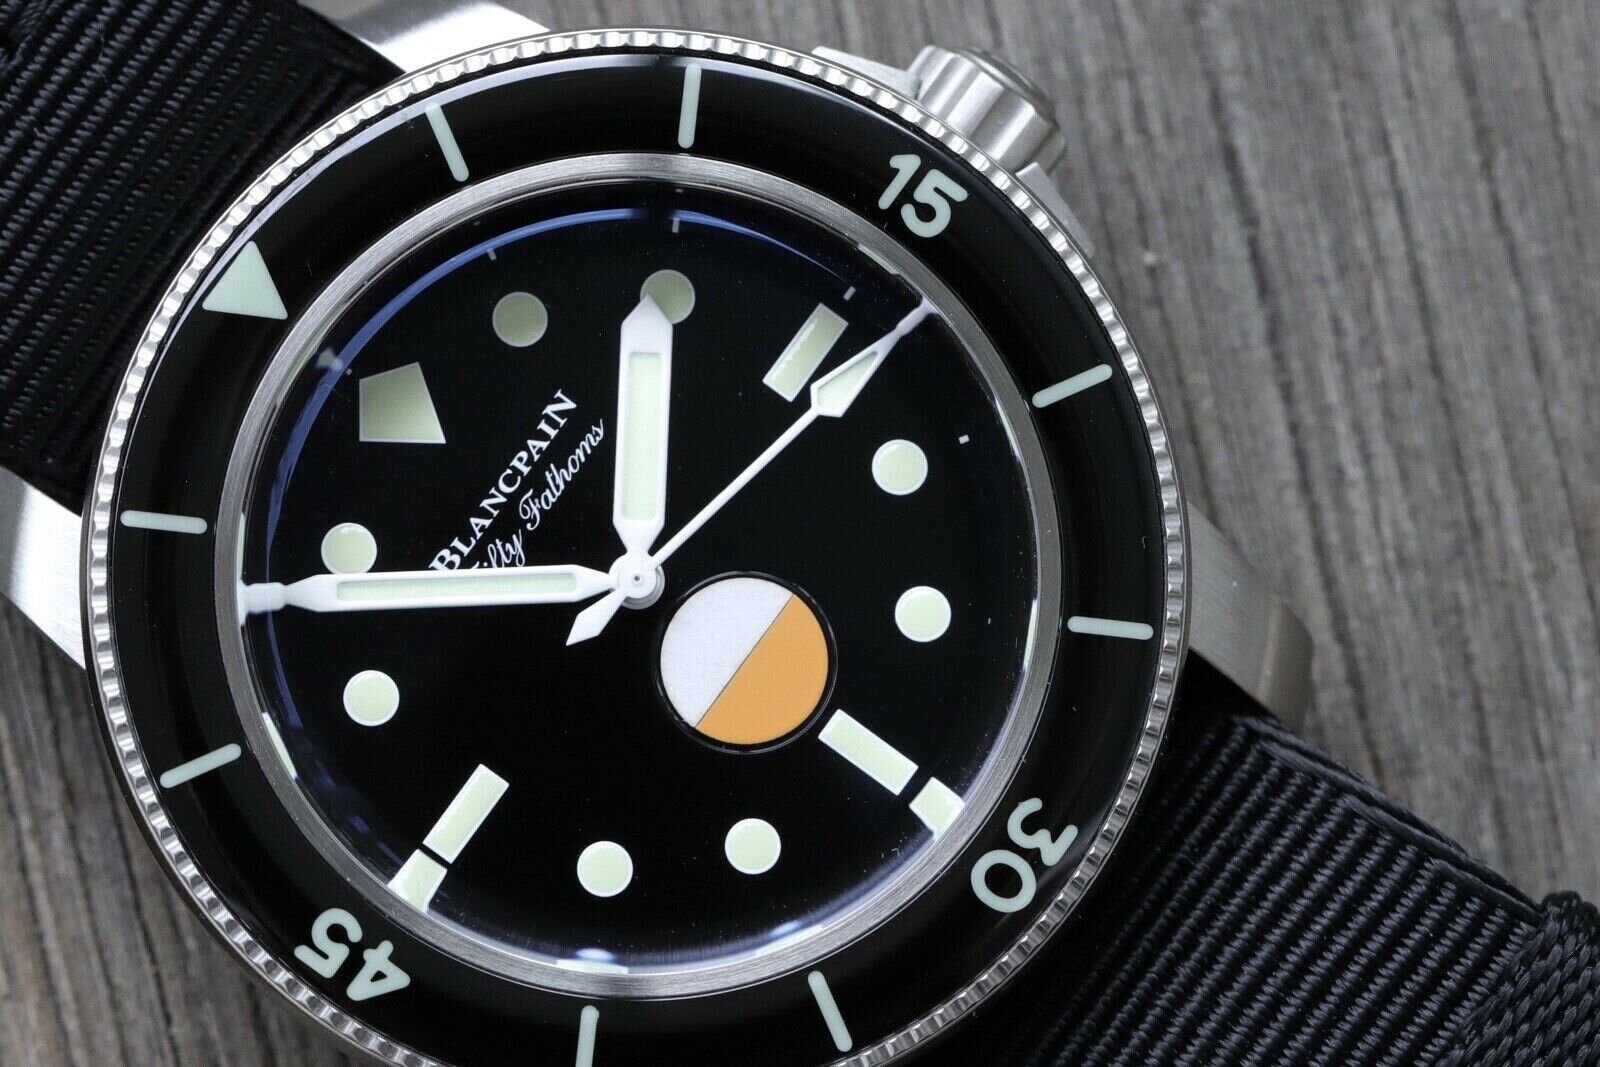 Blancpain_Fifty_Fathoms_Mil-Spec_5008_11B30_NABA_LE_for_HODINKEE_-_Brand_New_Watch_Vault_02.jpg